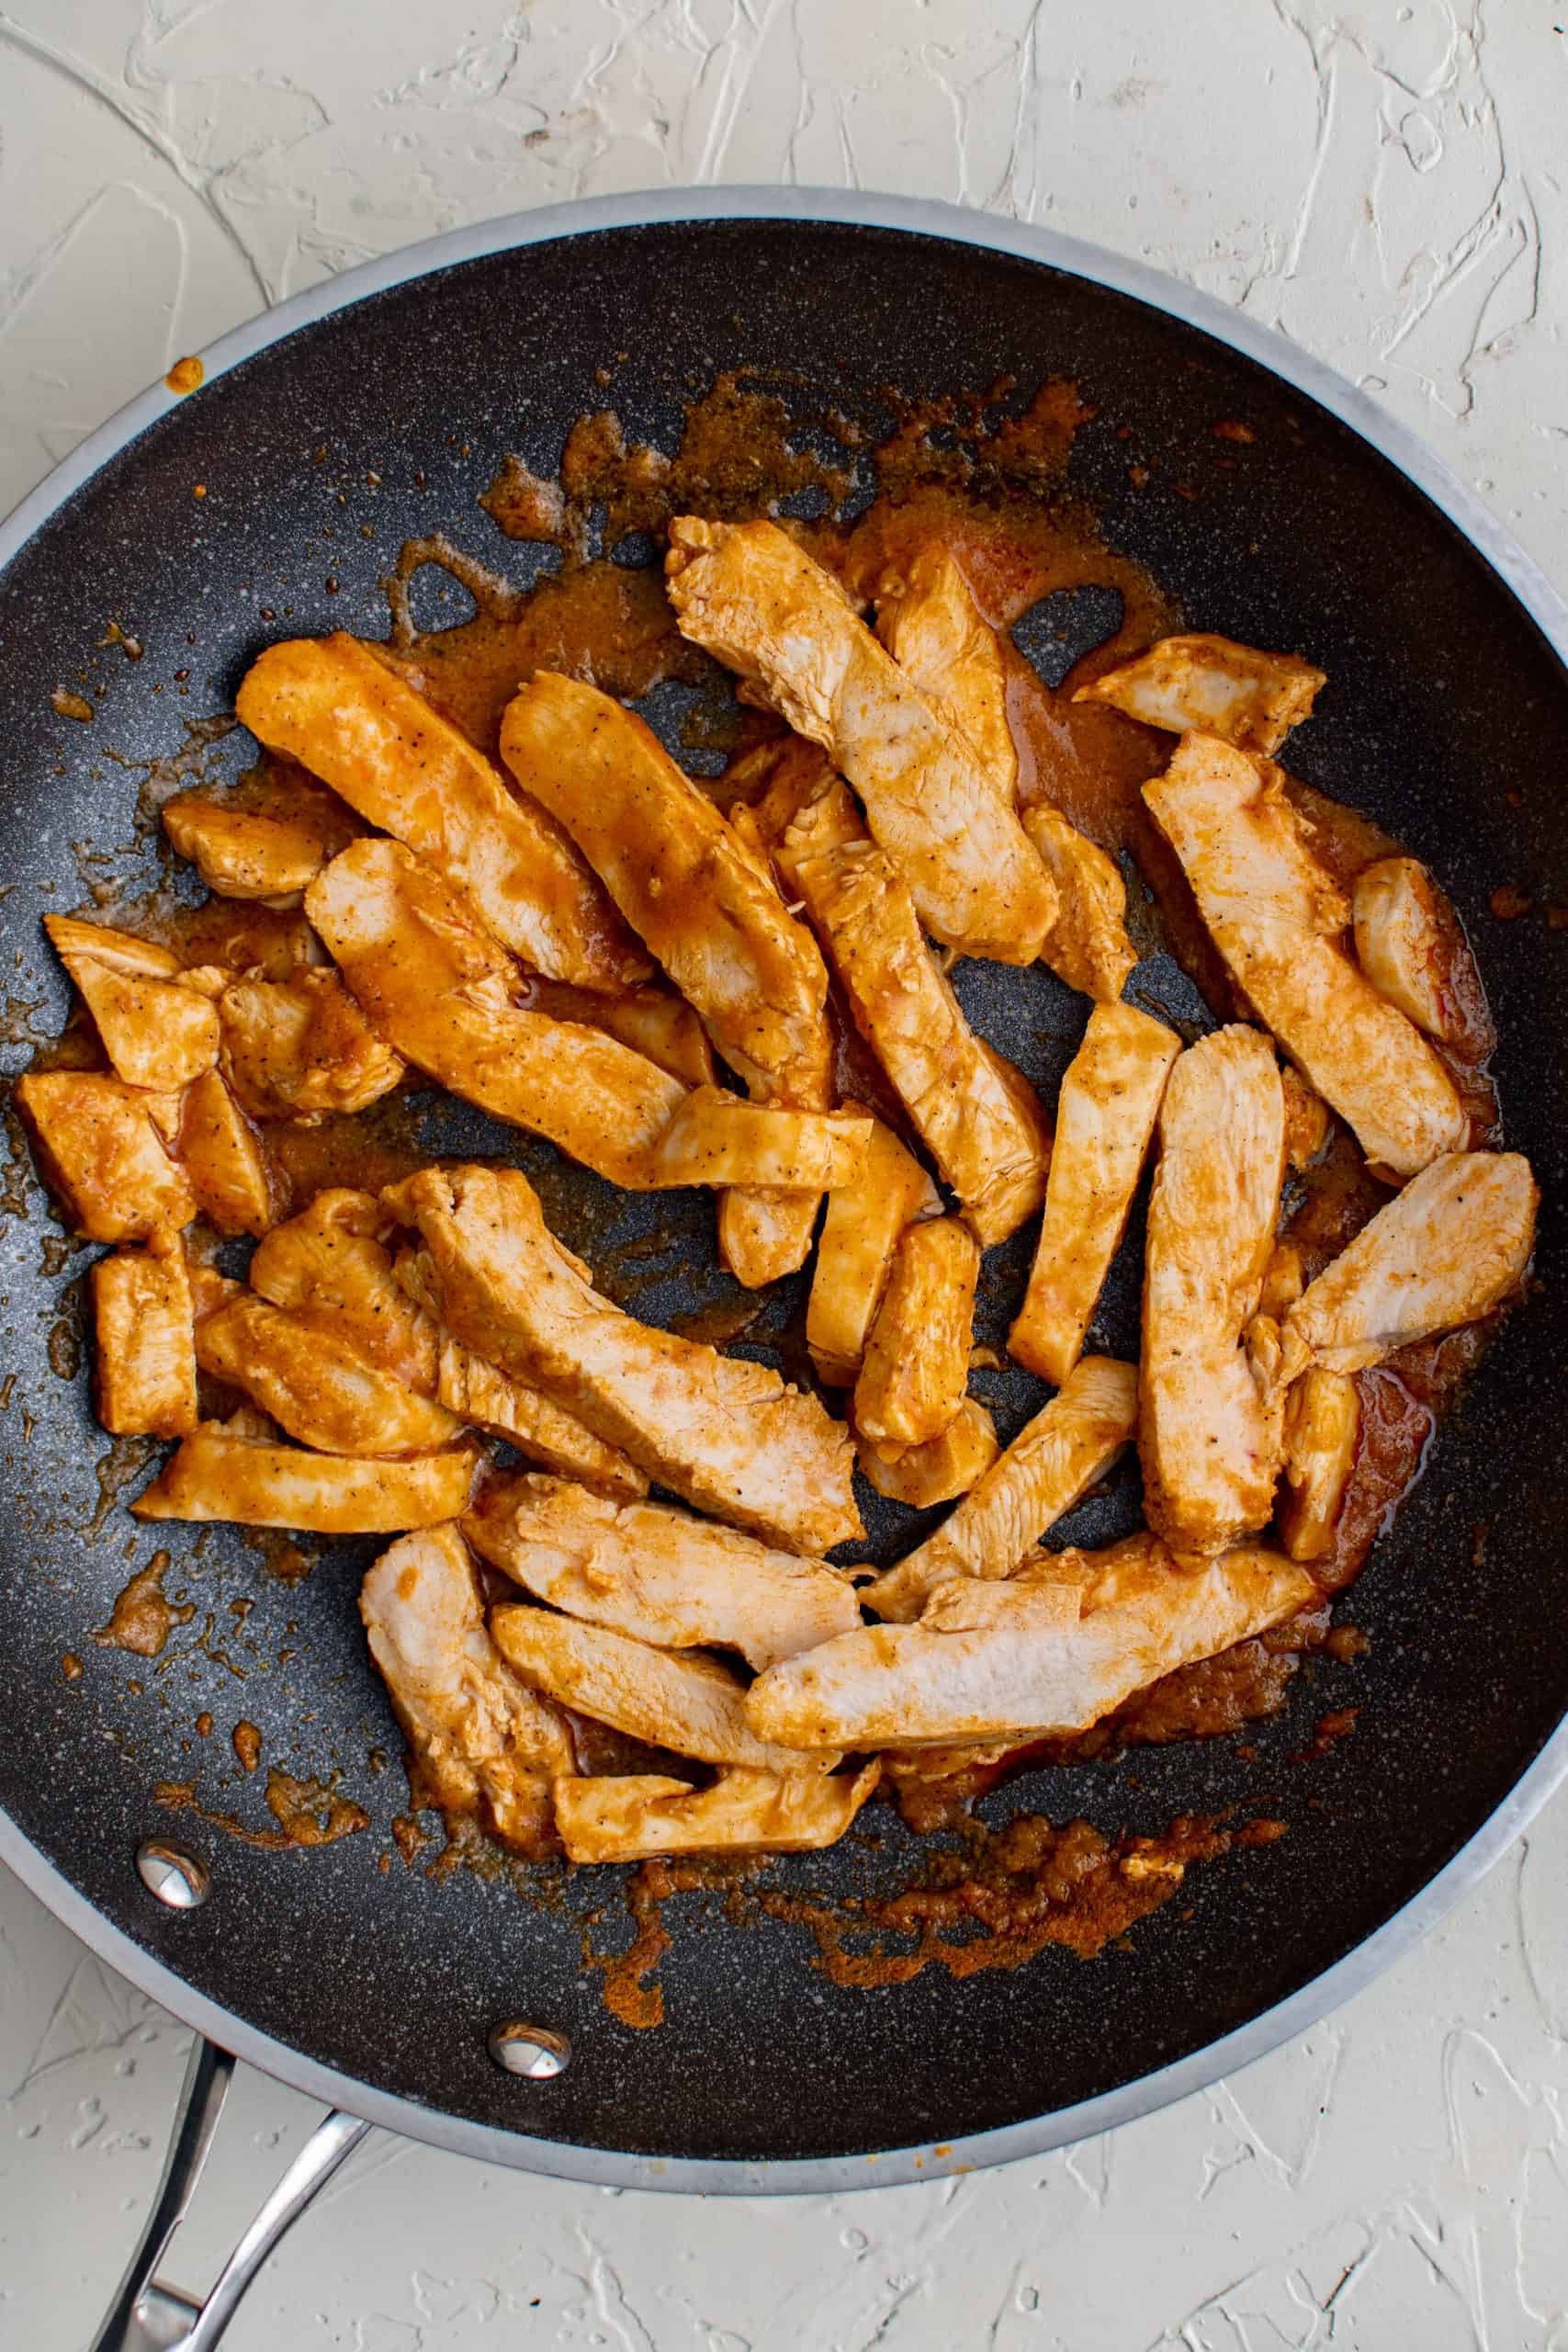 Sliced up chicken in pan.